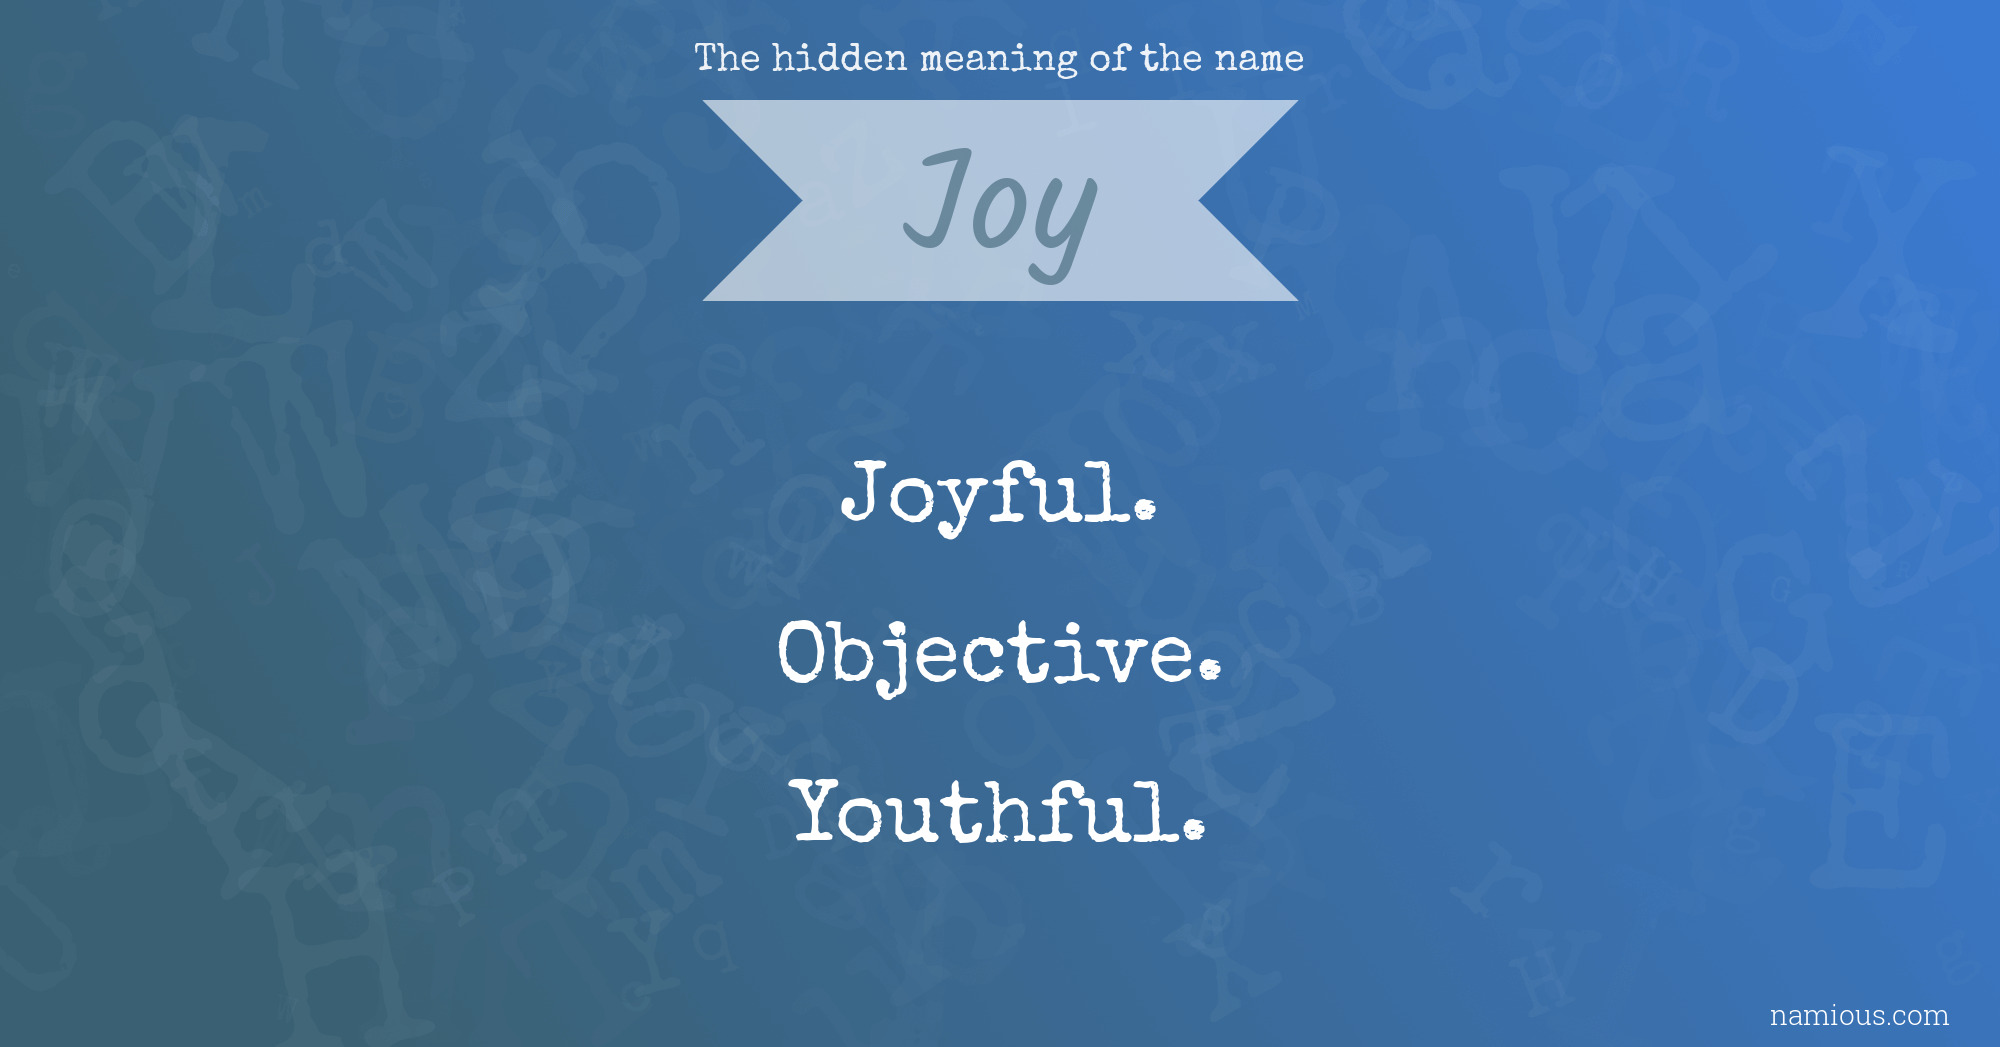 The hidden meaning of the name Joy